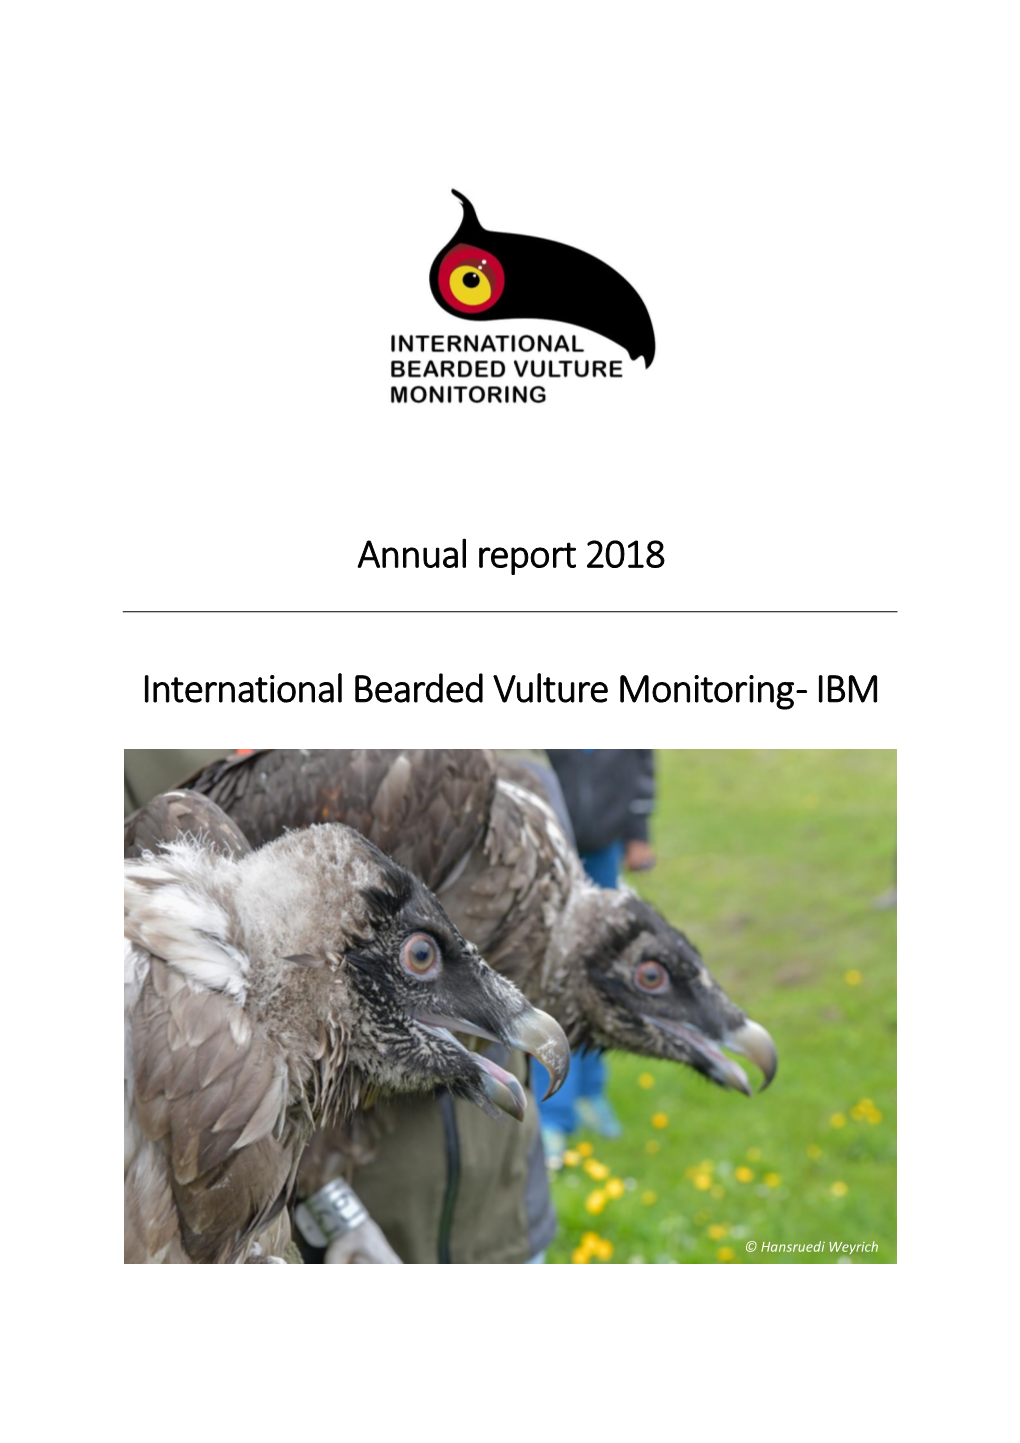 Annual Report 2018 International Bearded Vulture Monitoring